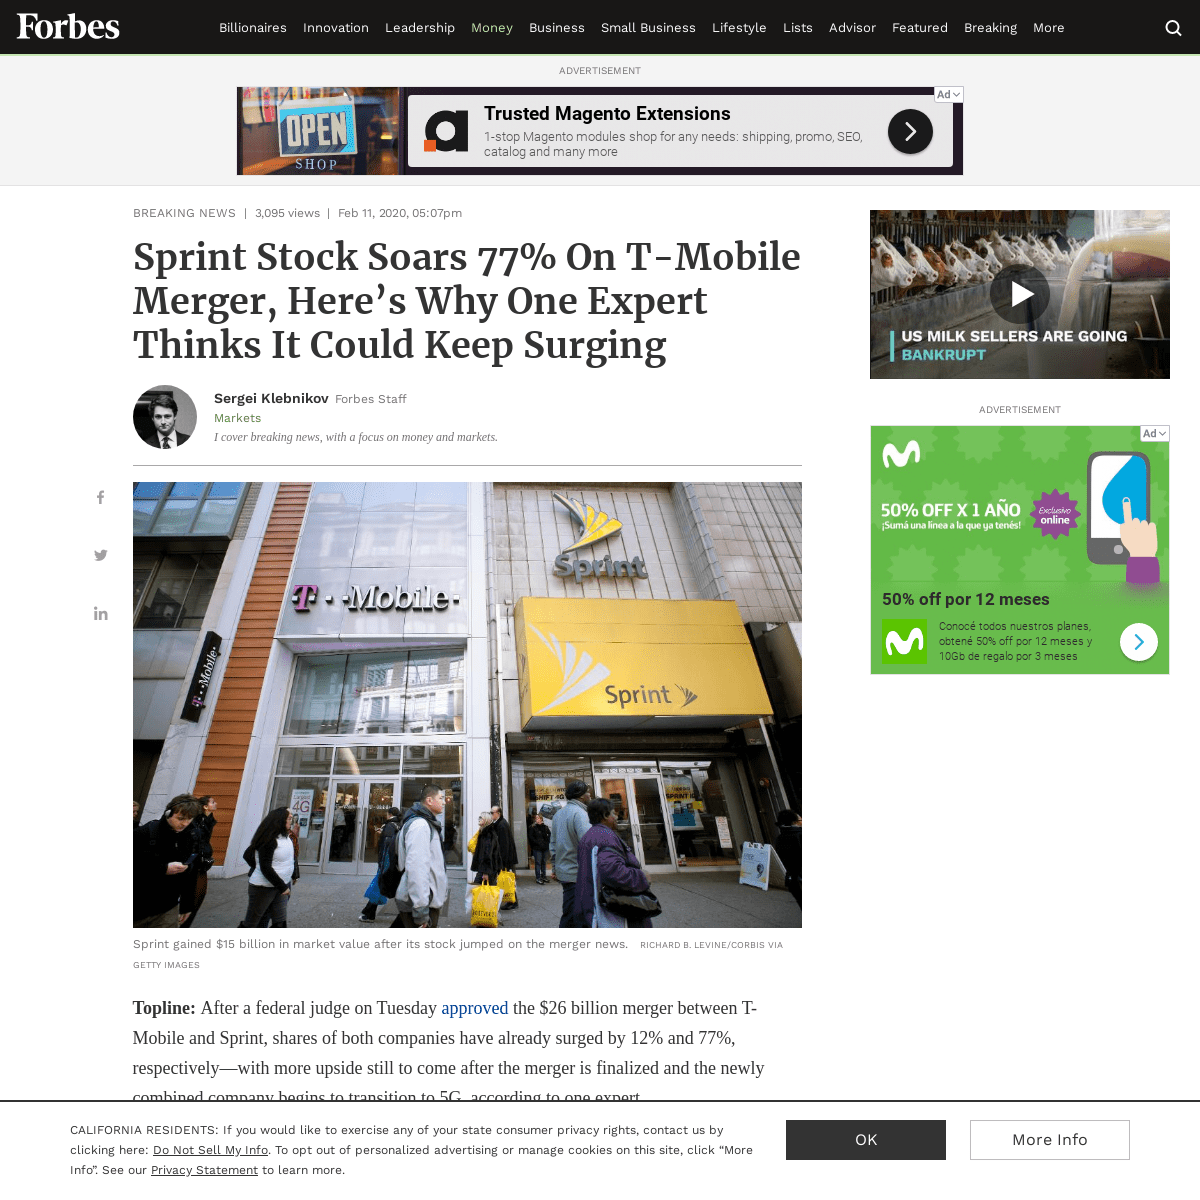 A complete backup of www.forbes.com/sites/sergeiklebnikov/2020/02/11/sprint-stock-soars-77-on-t-mobile-merger-heres-why-one-expe